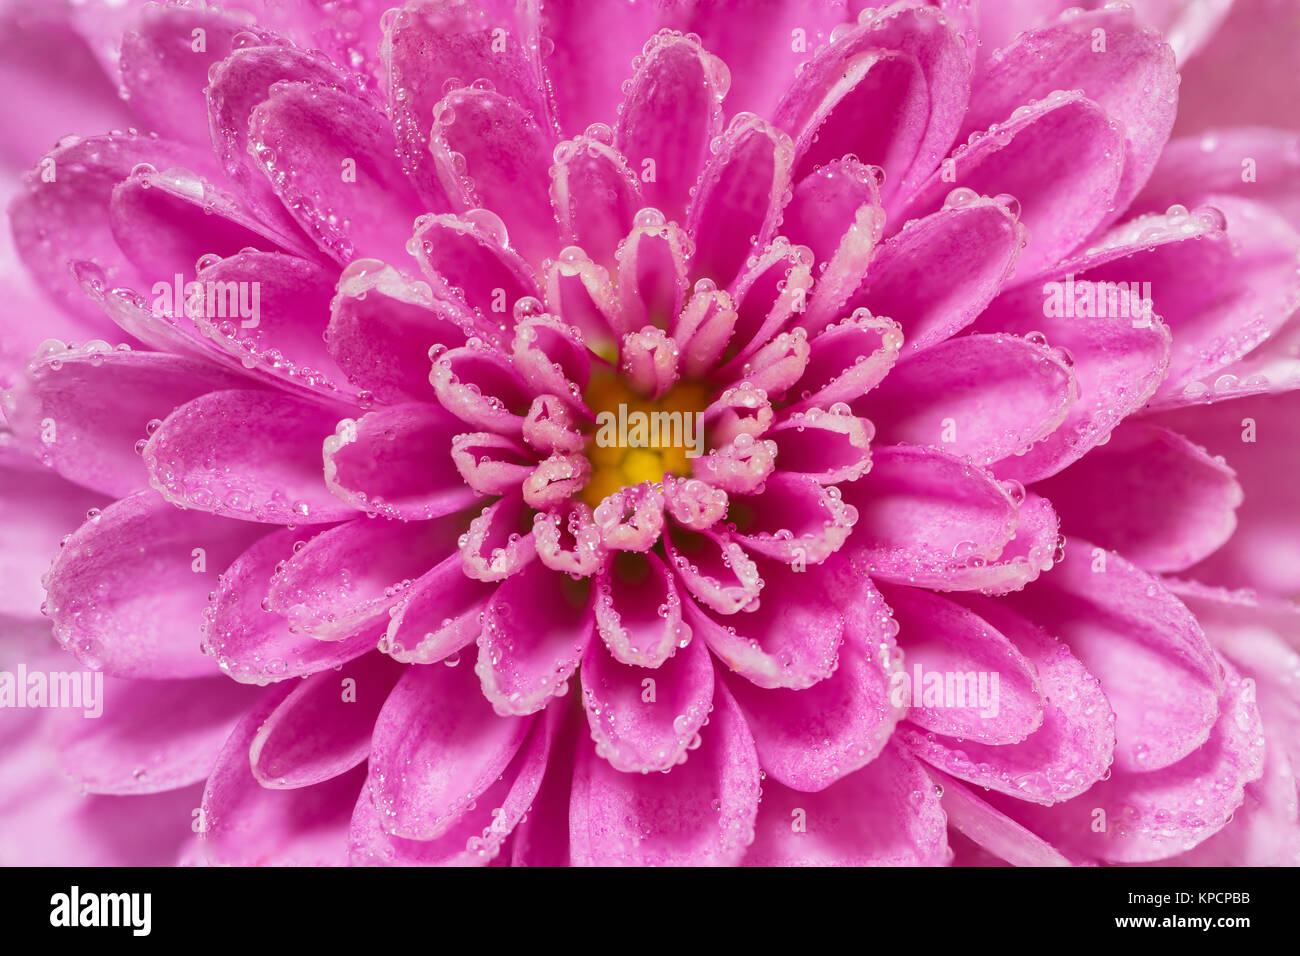 Chrysanthemum flower center, pink and purple, super macro closeup texture and pattern, petals showing and flower center, with many water droplets Stock Photo